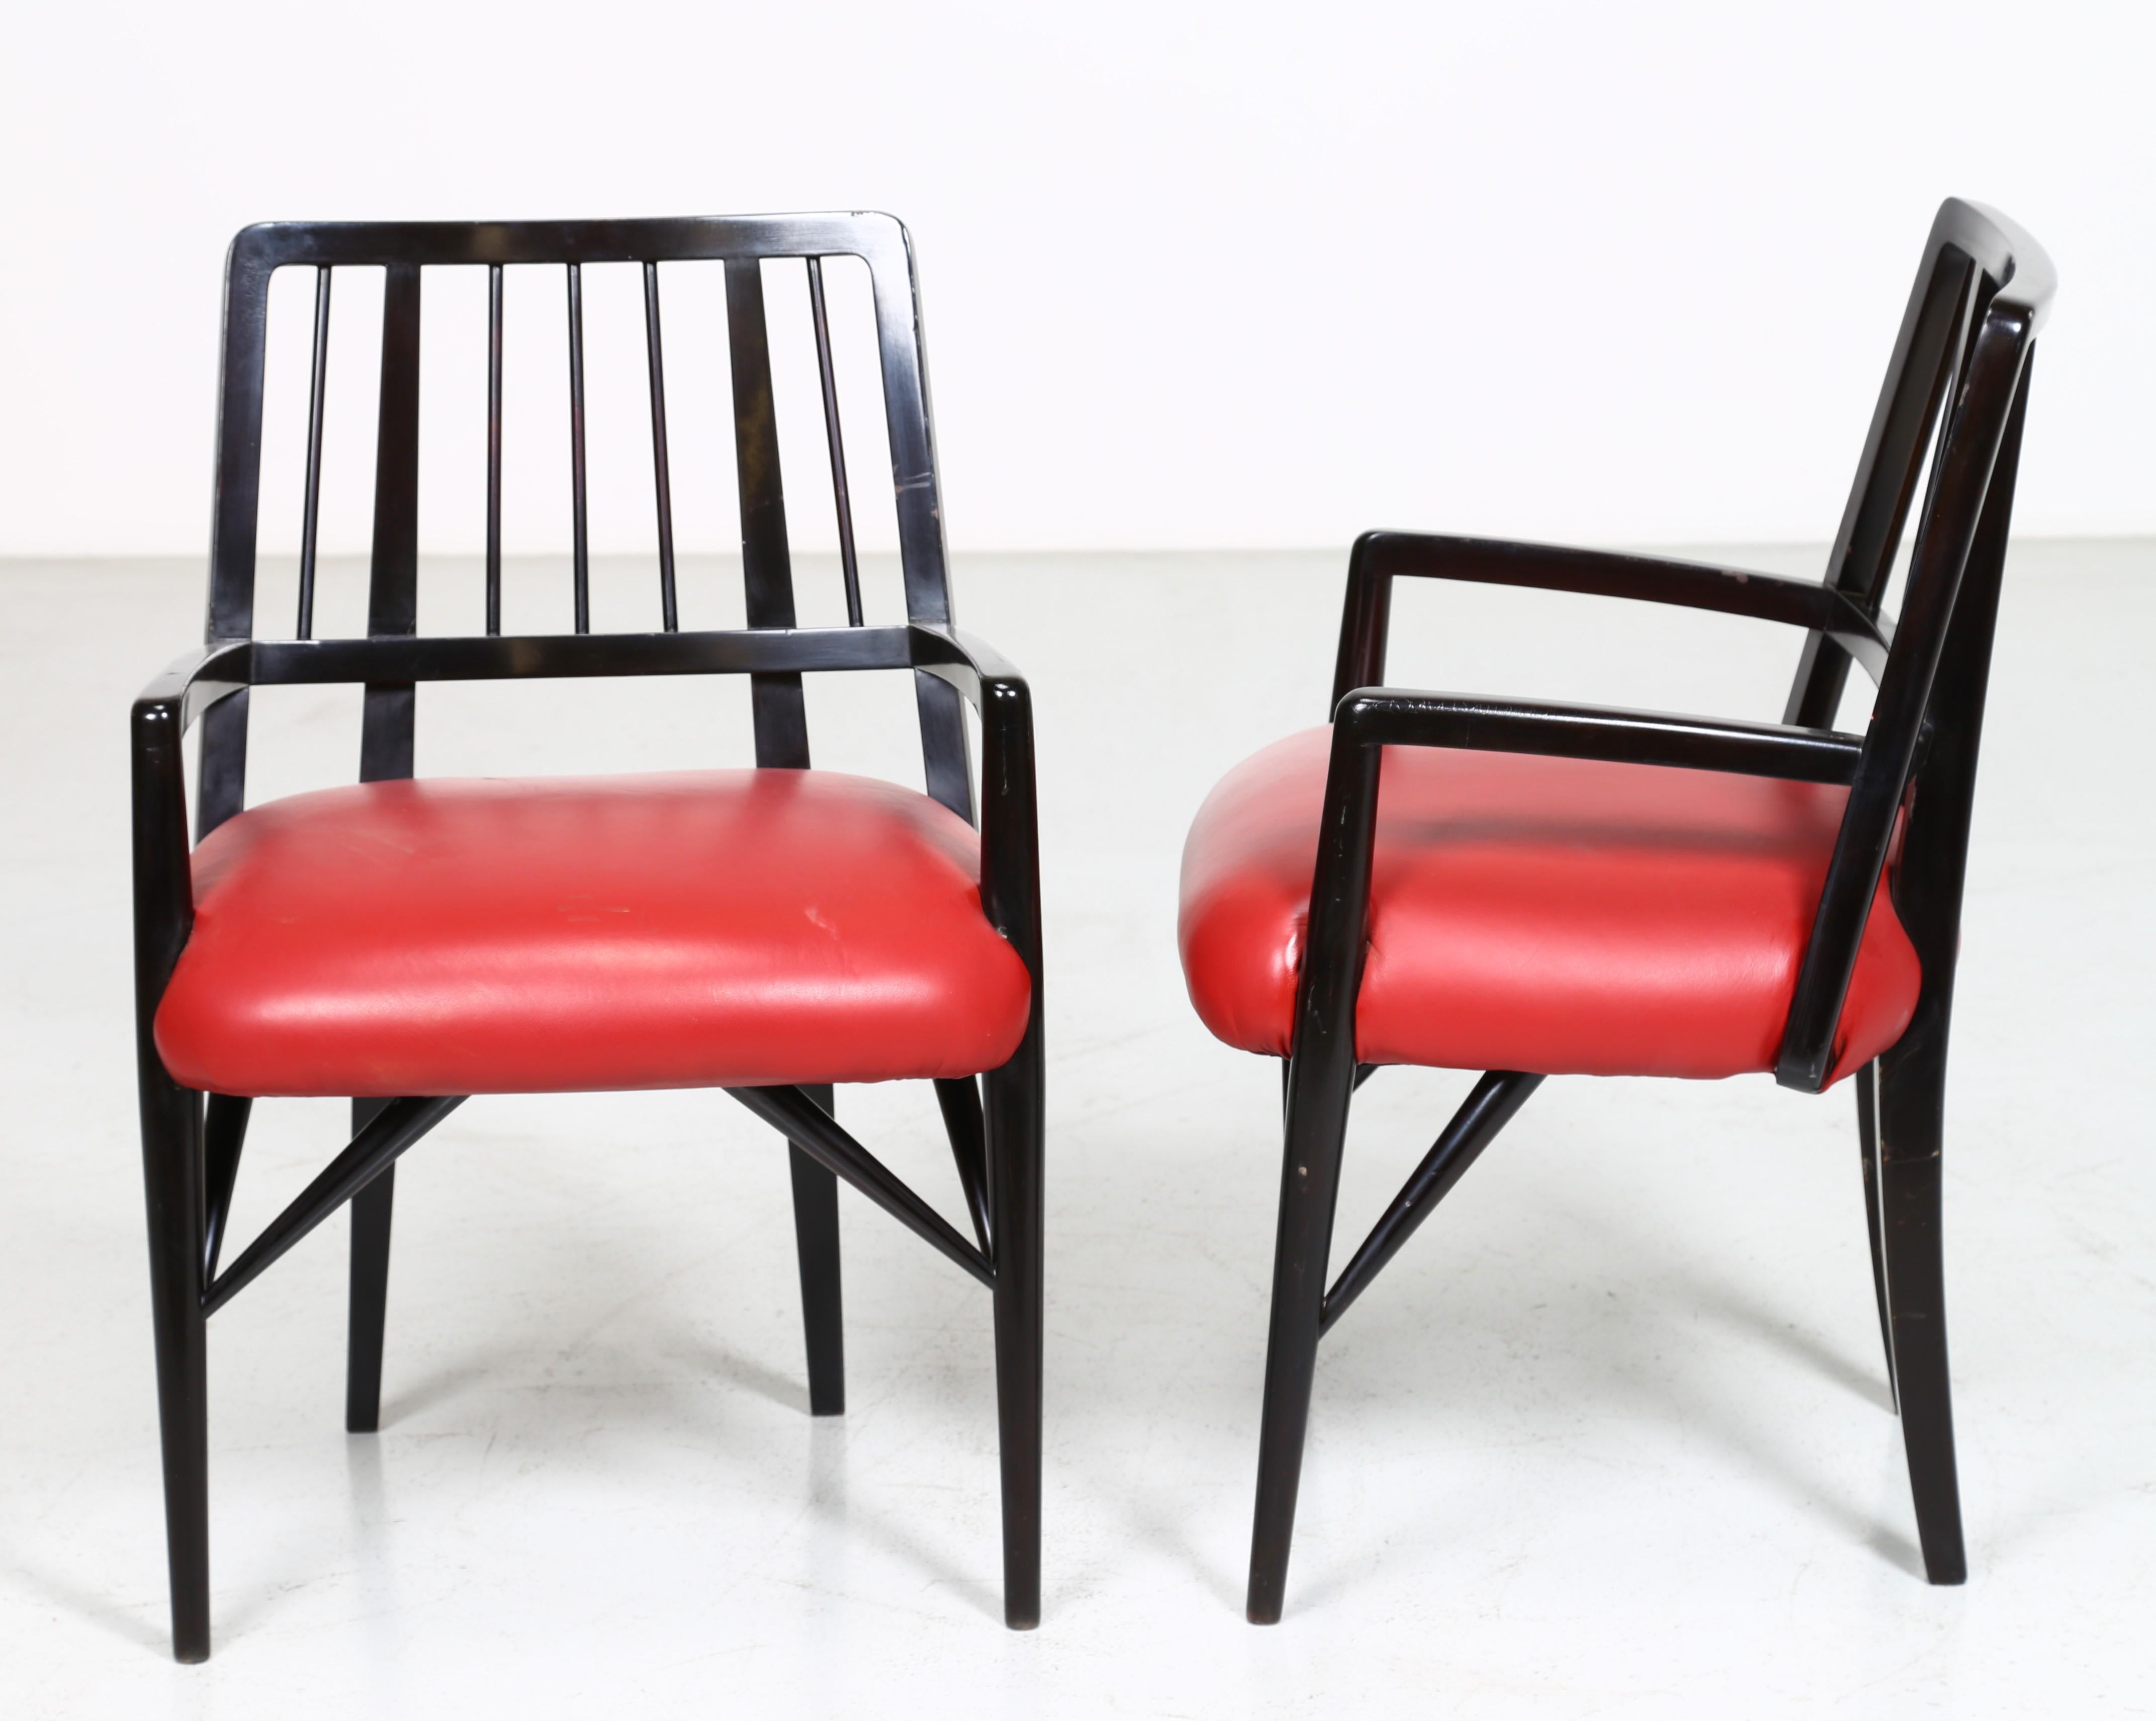 American Paul Laszlo Set of Four Chairs in Black Lacquered Wood, 1950s For Sale